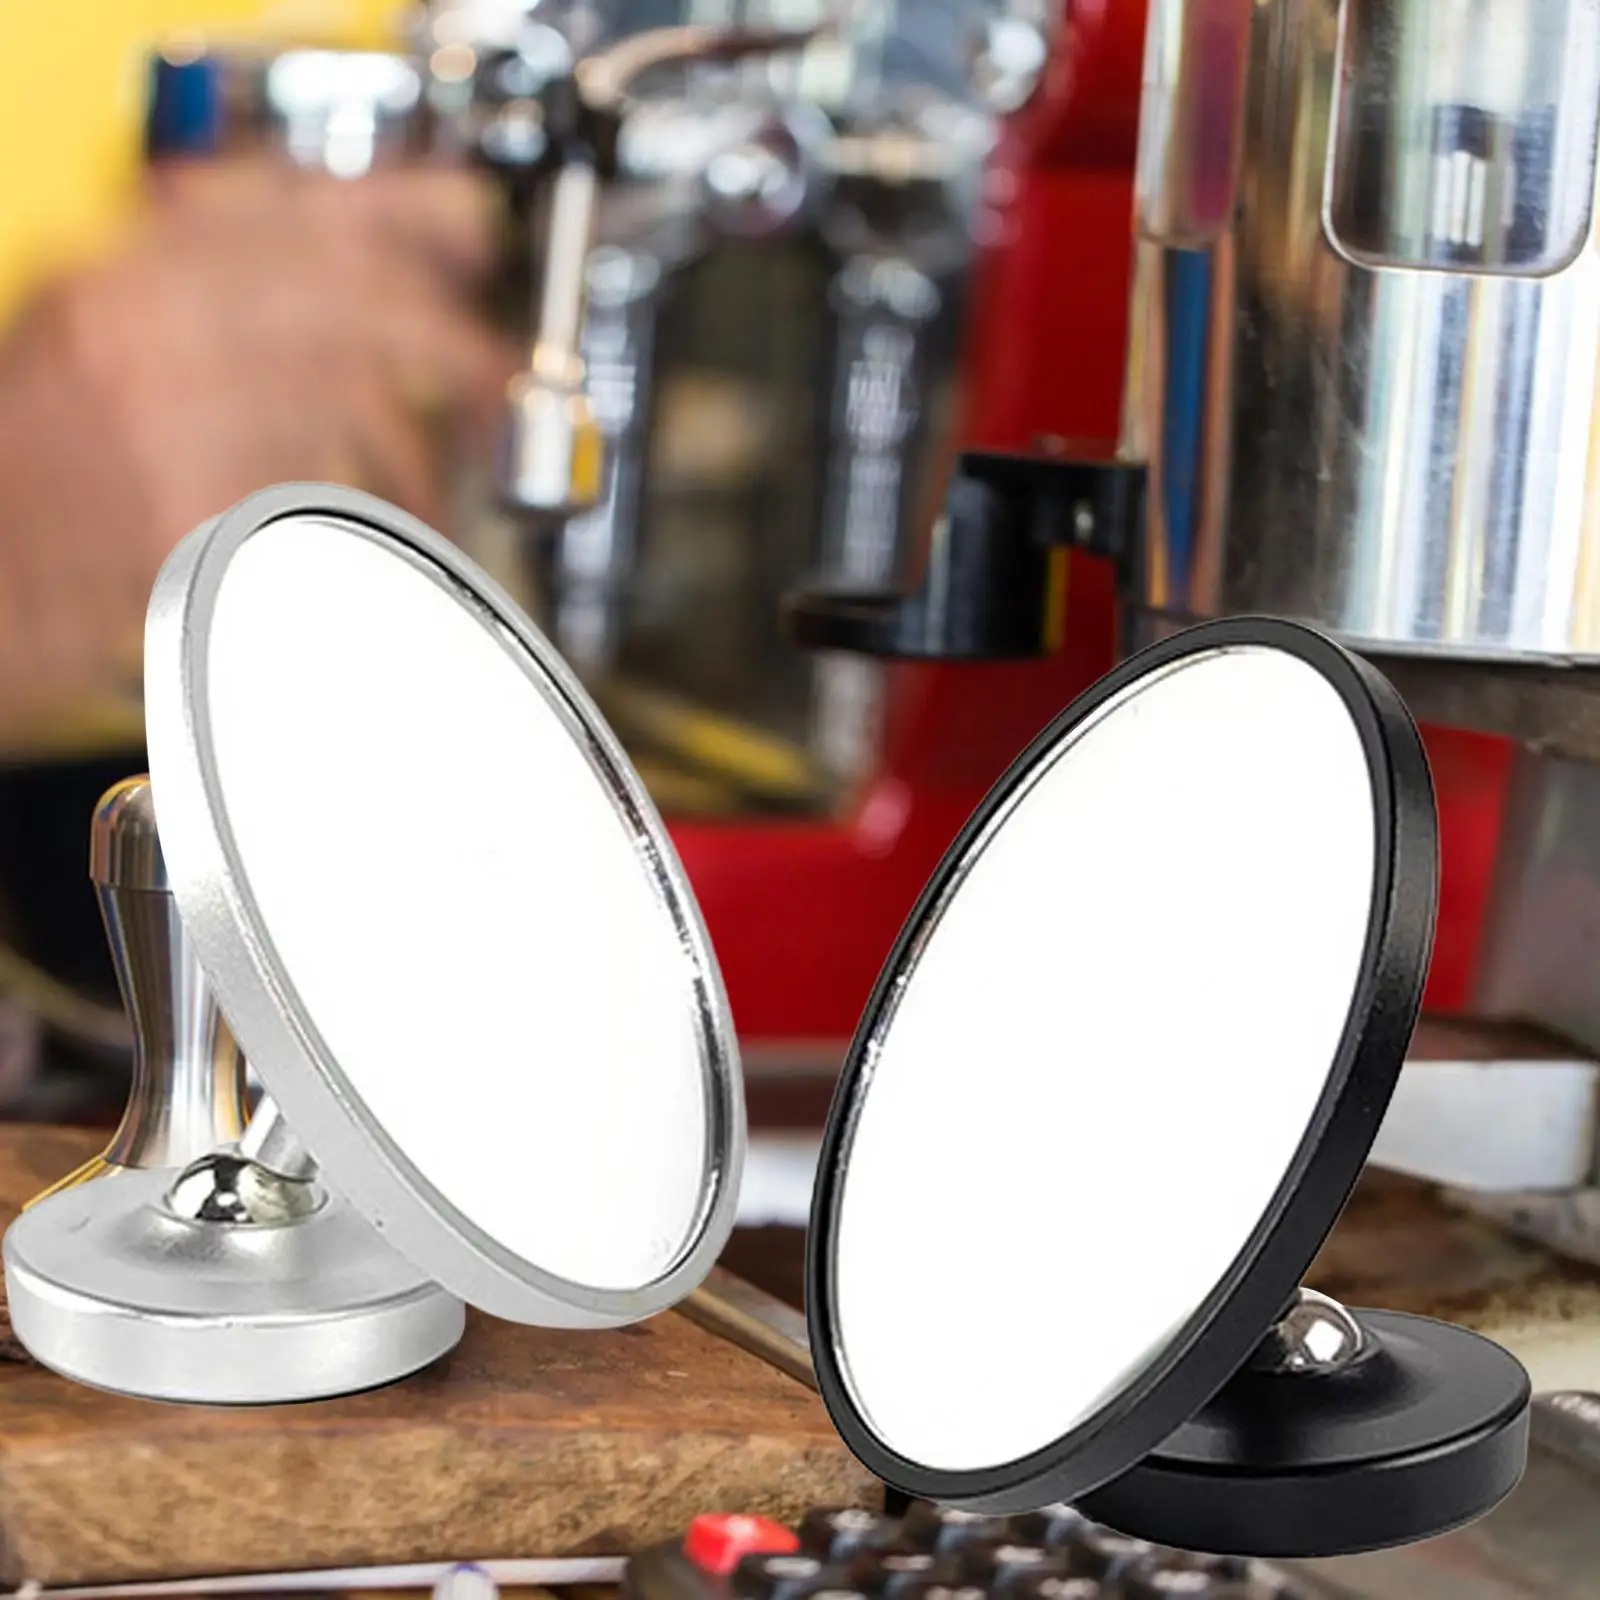 Coffee Flow Rate Observation Reflective Mirror Cafe Machine Tool Espresso Lens Mirror for Restaurant Barista